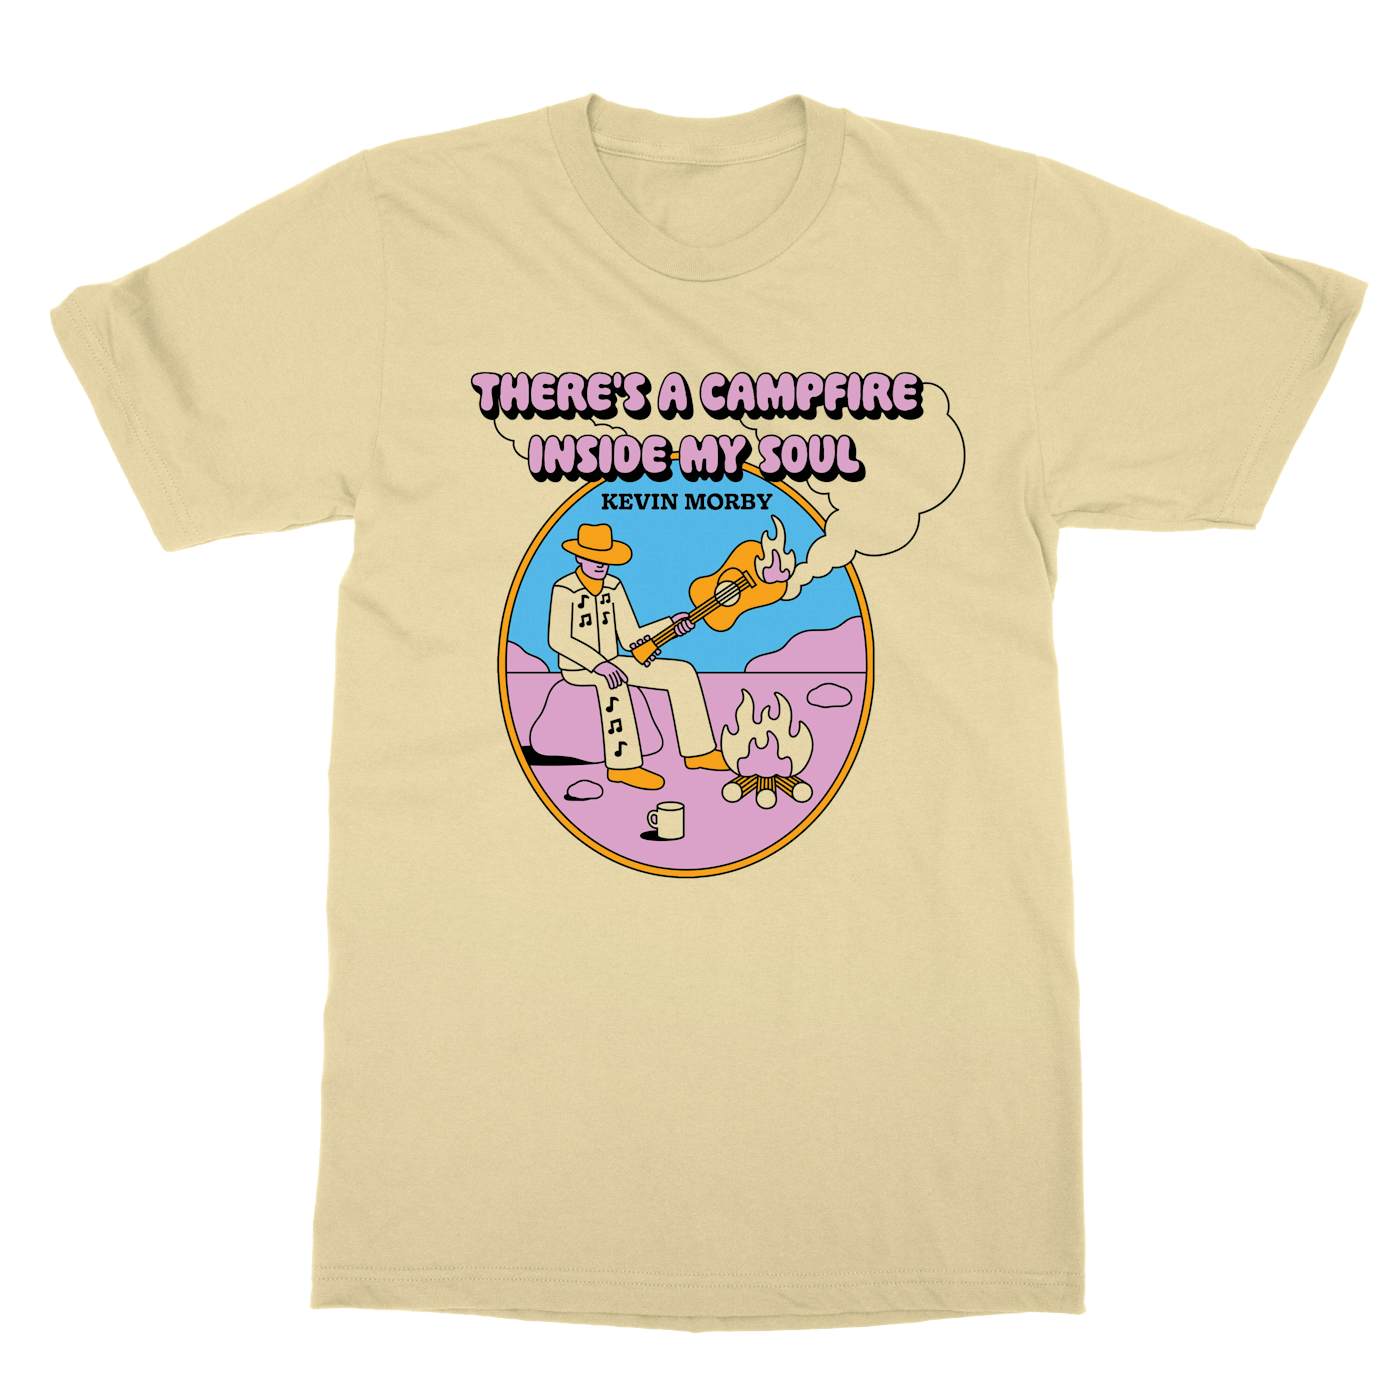 Kevin Morby | Campfire T-Shirt